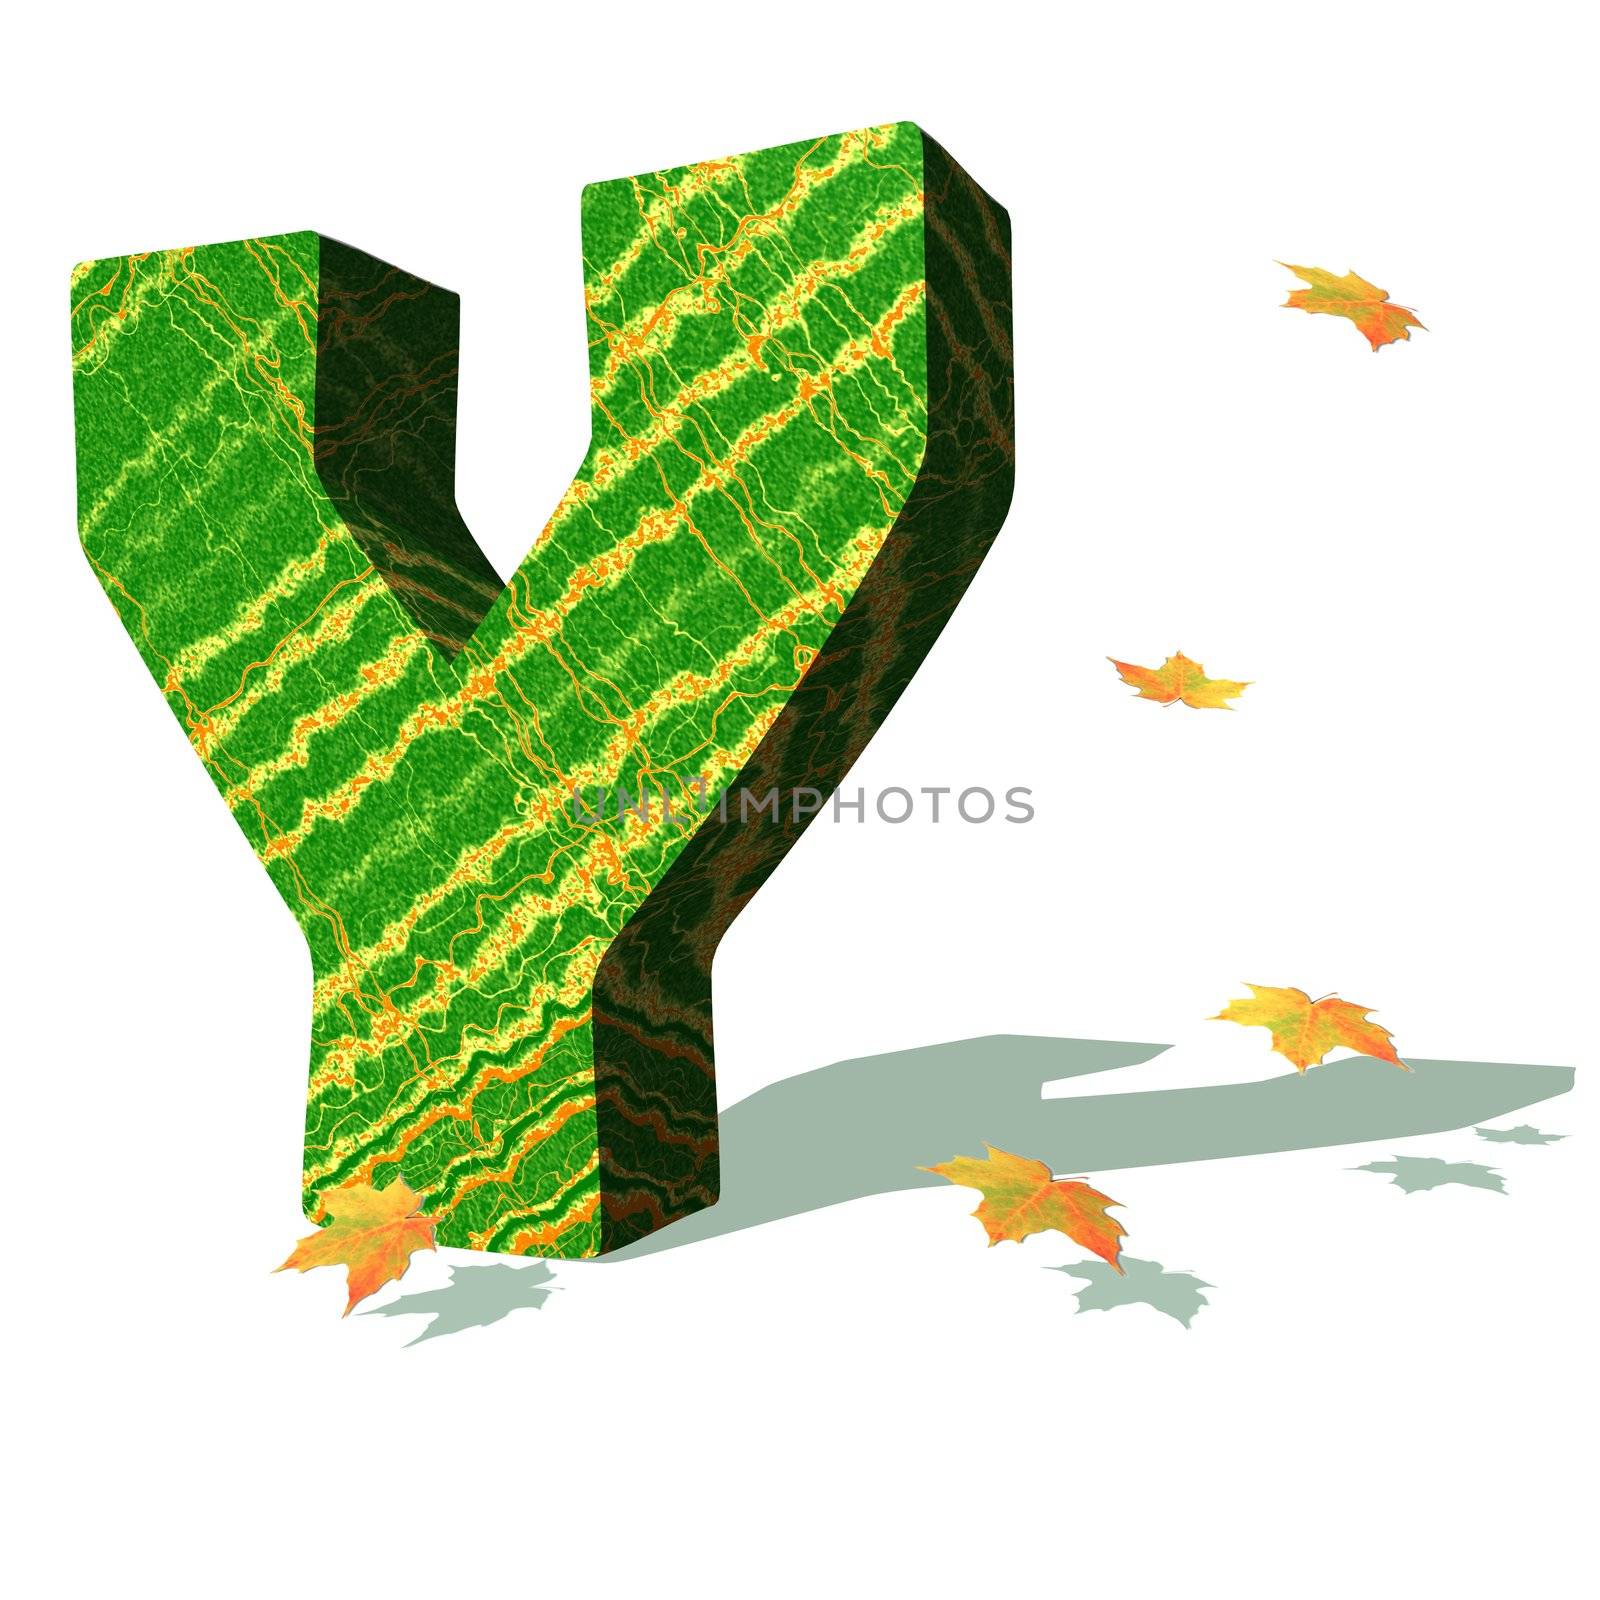 Green ecological Y capital letter surrounded by few autumn falling leaves in a white background with shadows